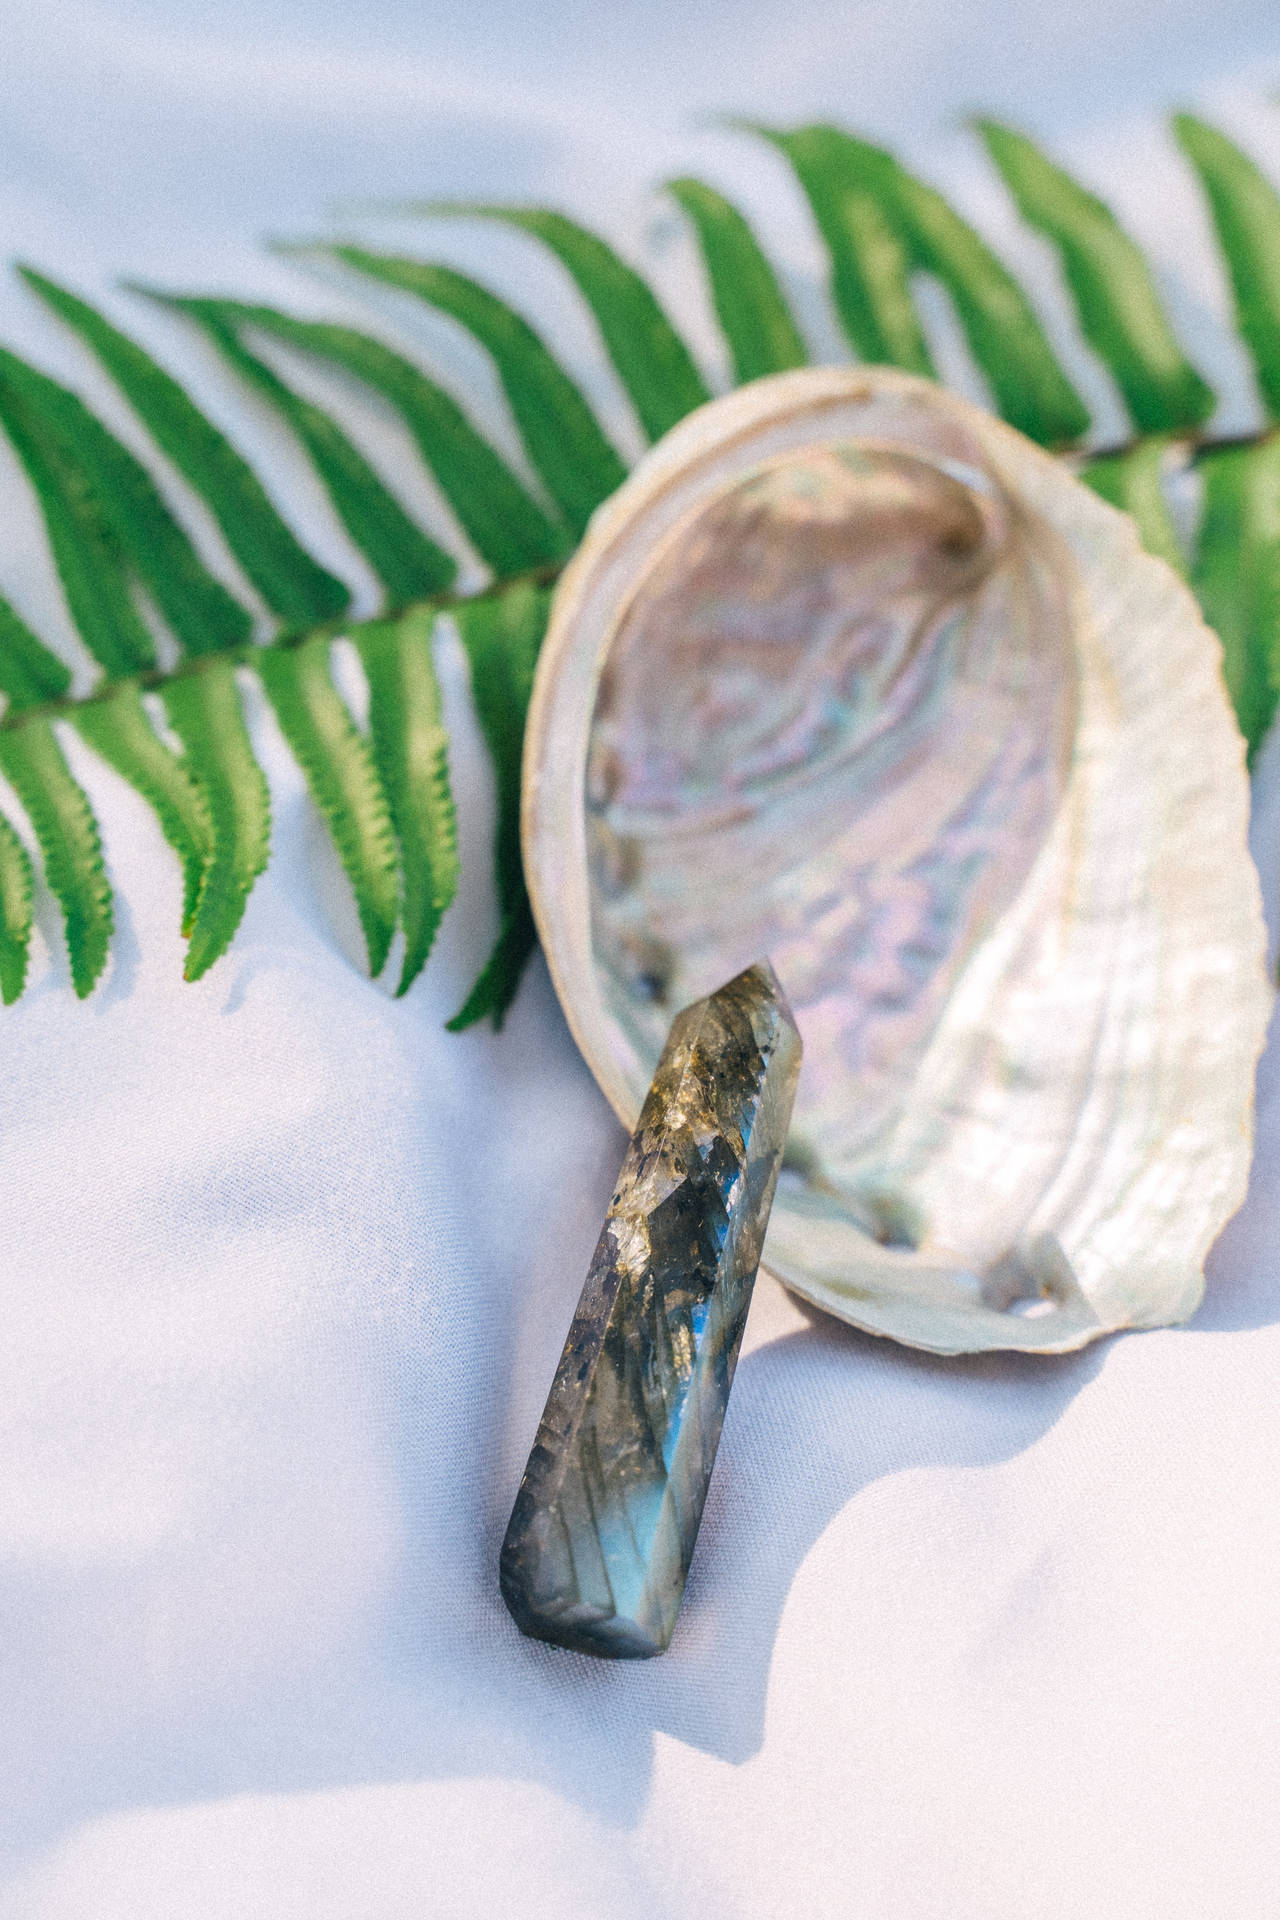 Vibrant Abalone Shell with Quartz Crystal within. Wallpaper